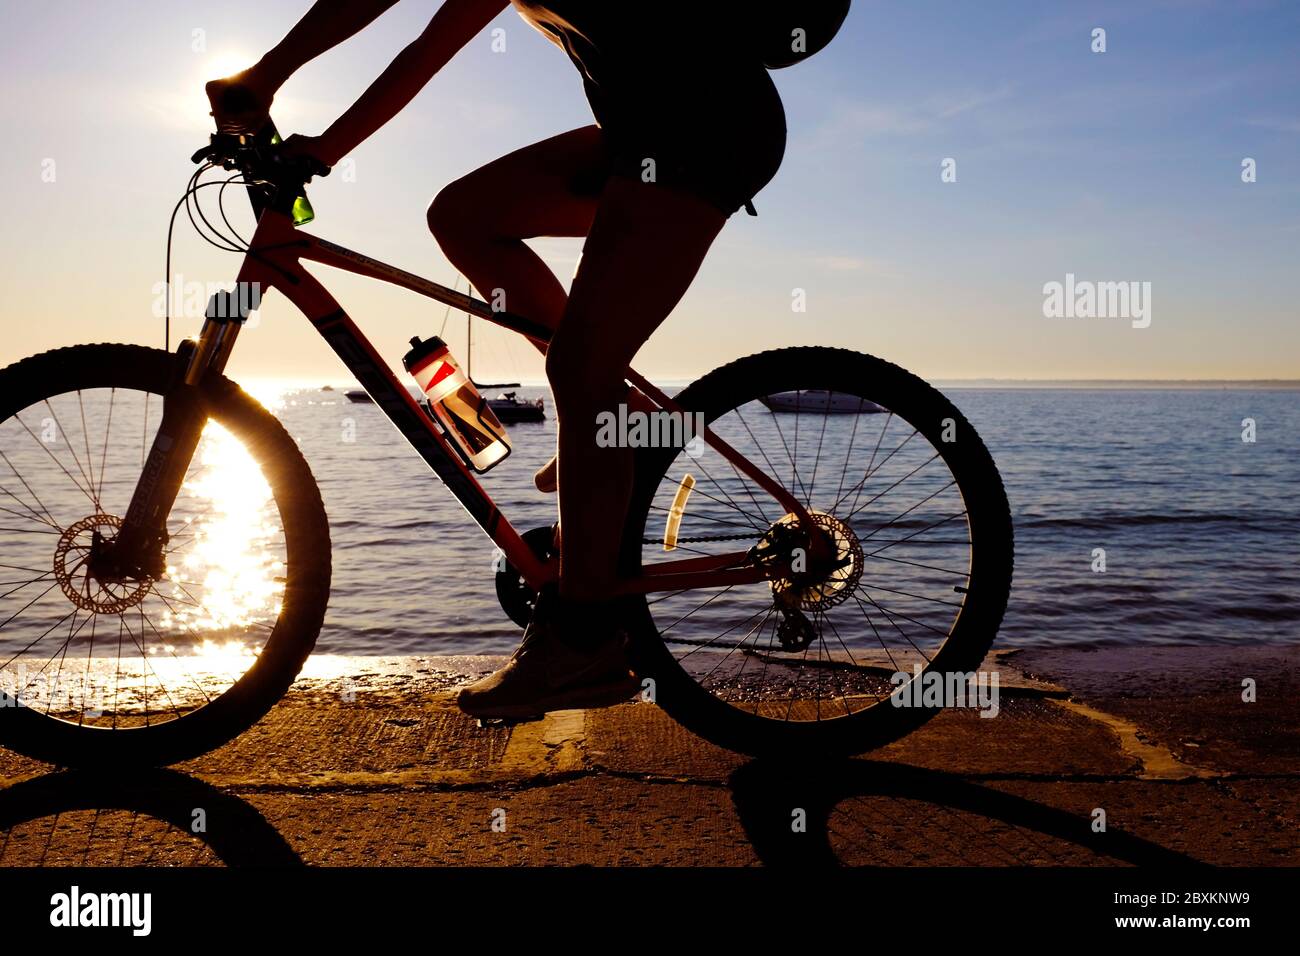 Cycling along seafront sea wall promenade revetment as sun setting over horizon in background shining through wheel rider in silhouette Stock Photo